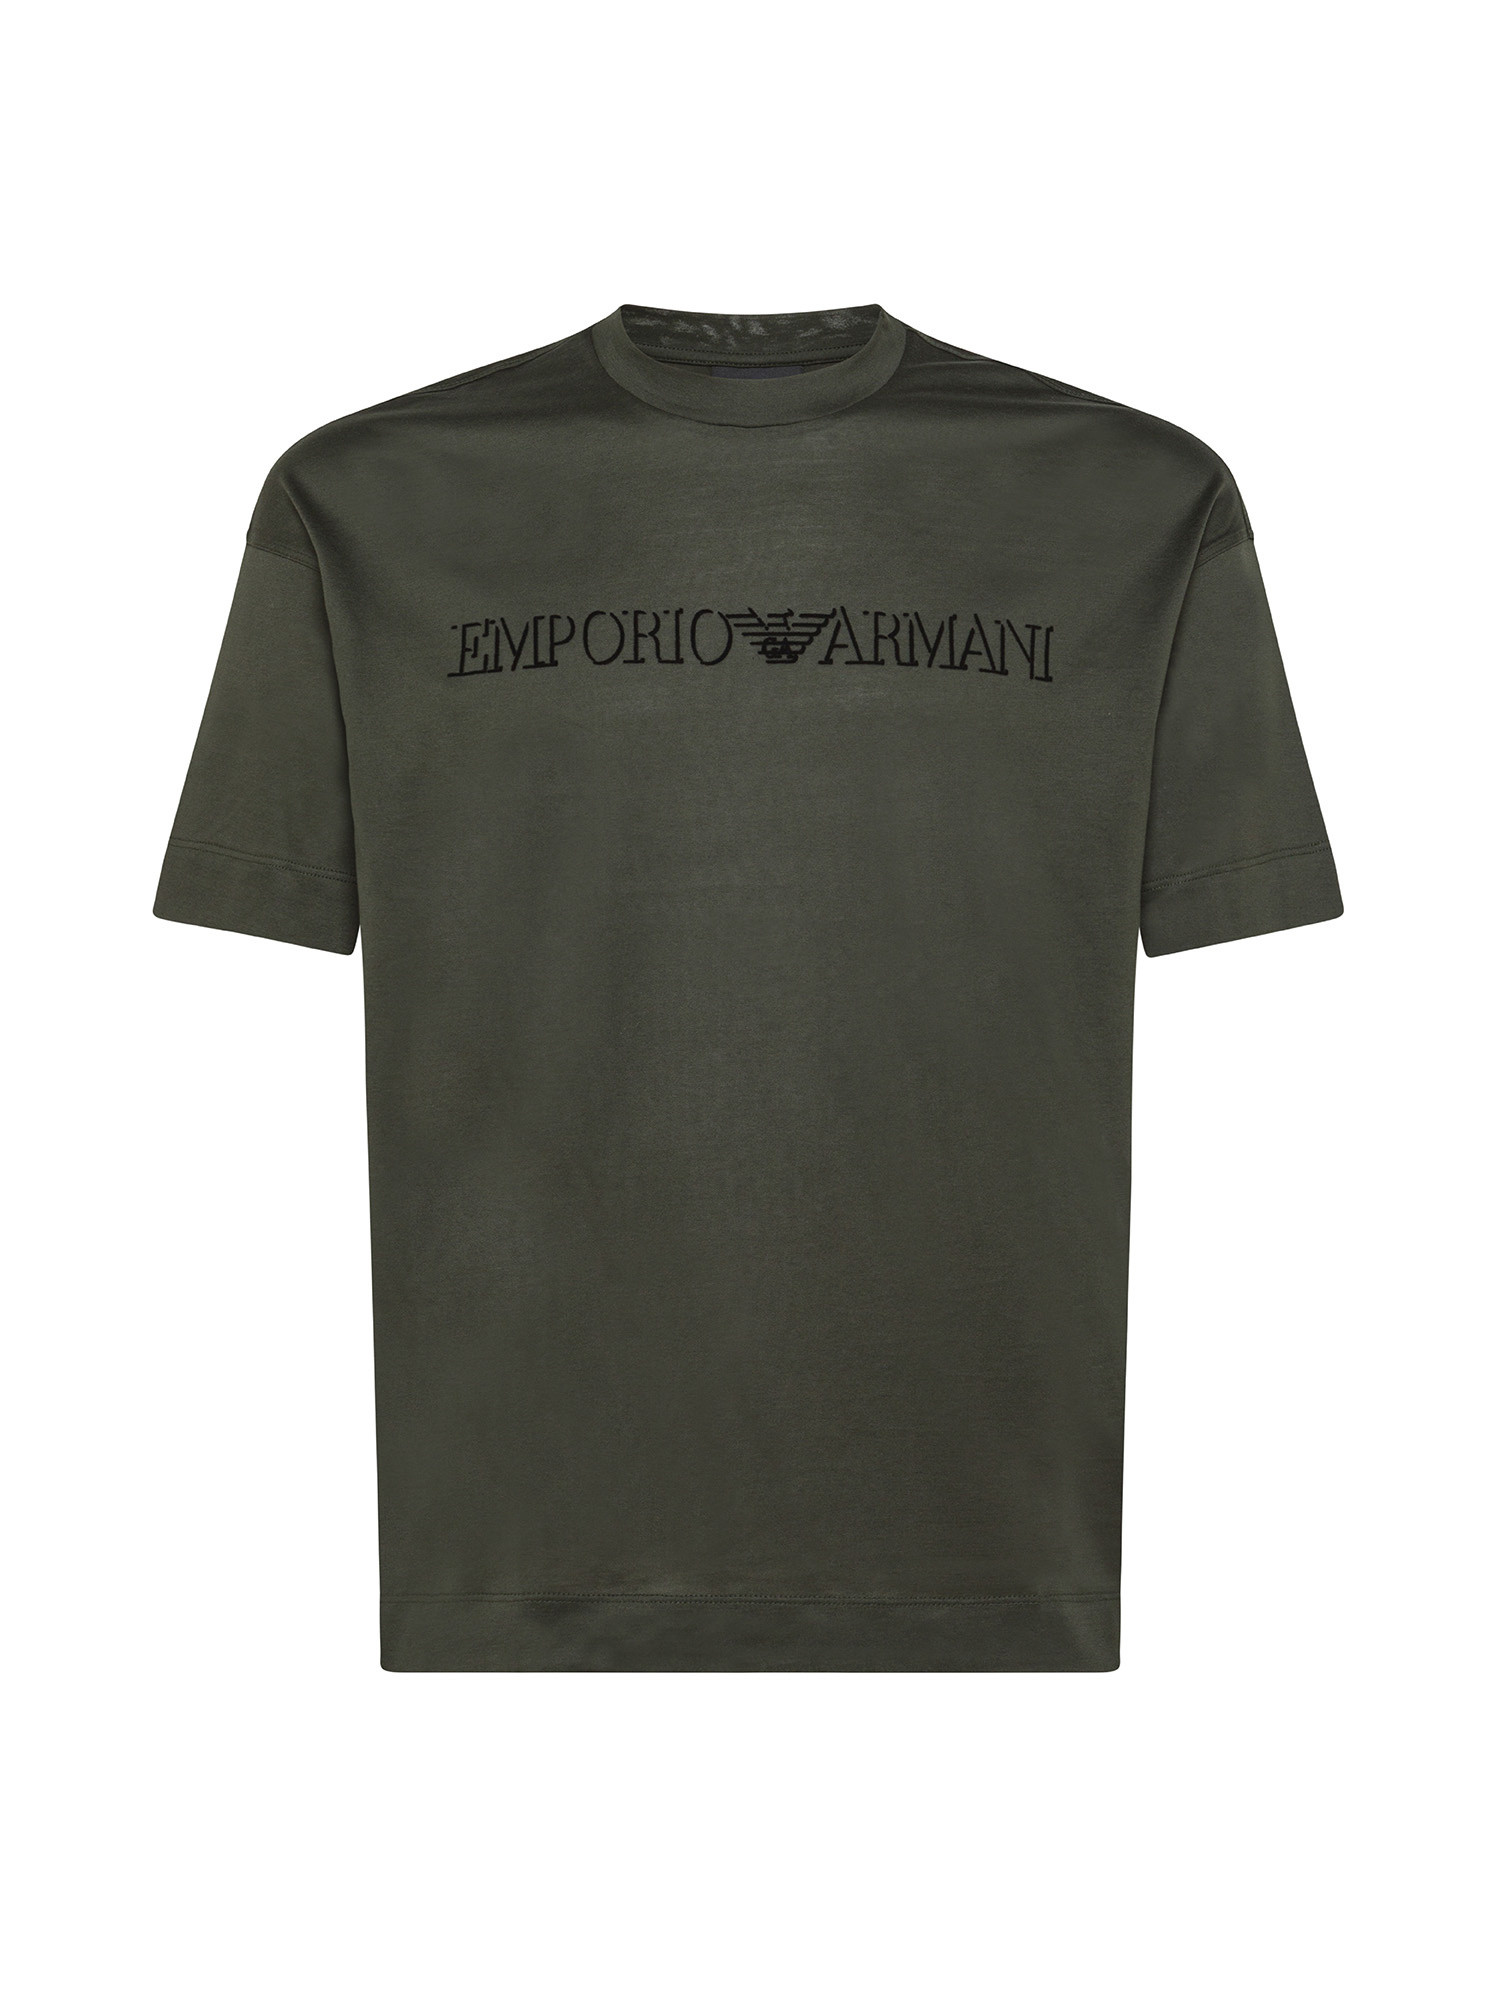 Emporio Armani - Mercerized jersey T-shirt with flock logo, Green, large image number 0